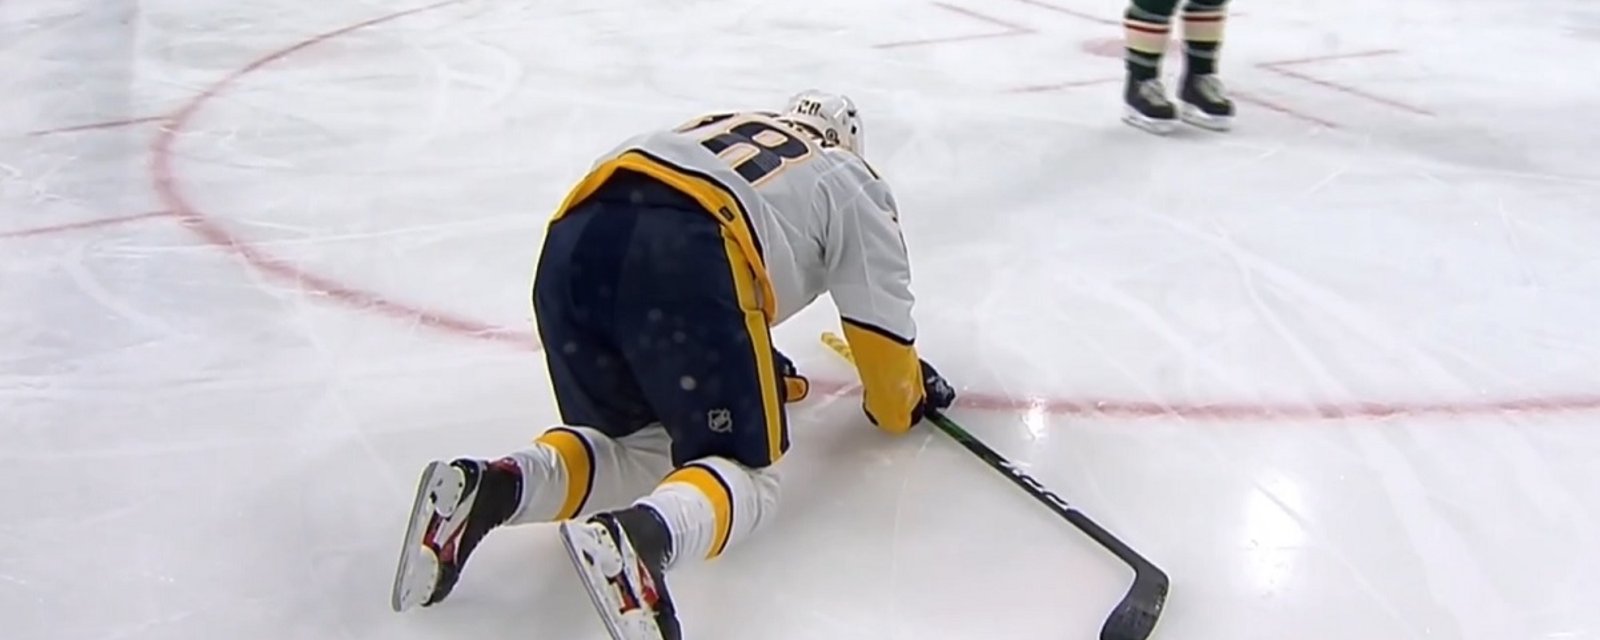 Tolvanen knocked out of the game after his head is pancaked into the boards.